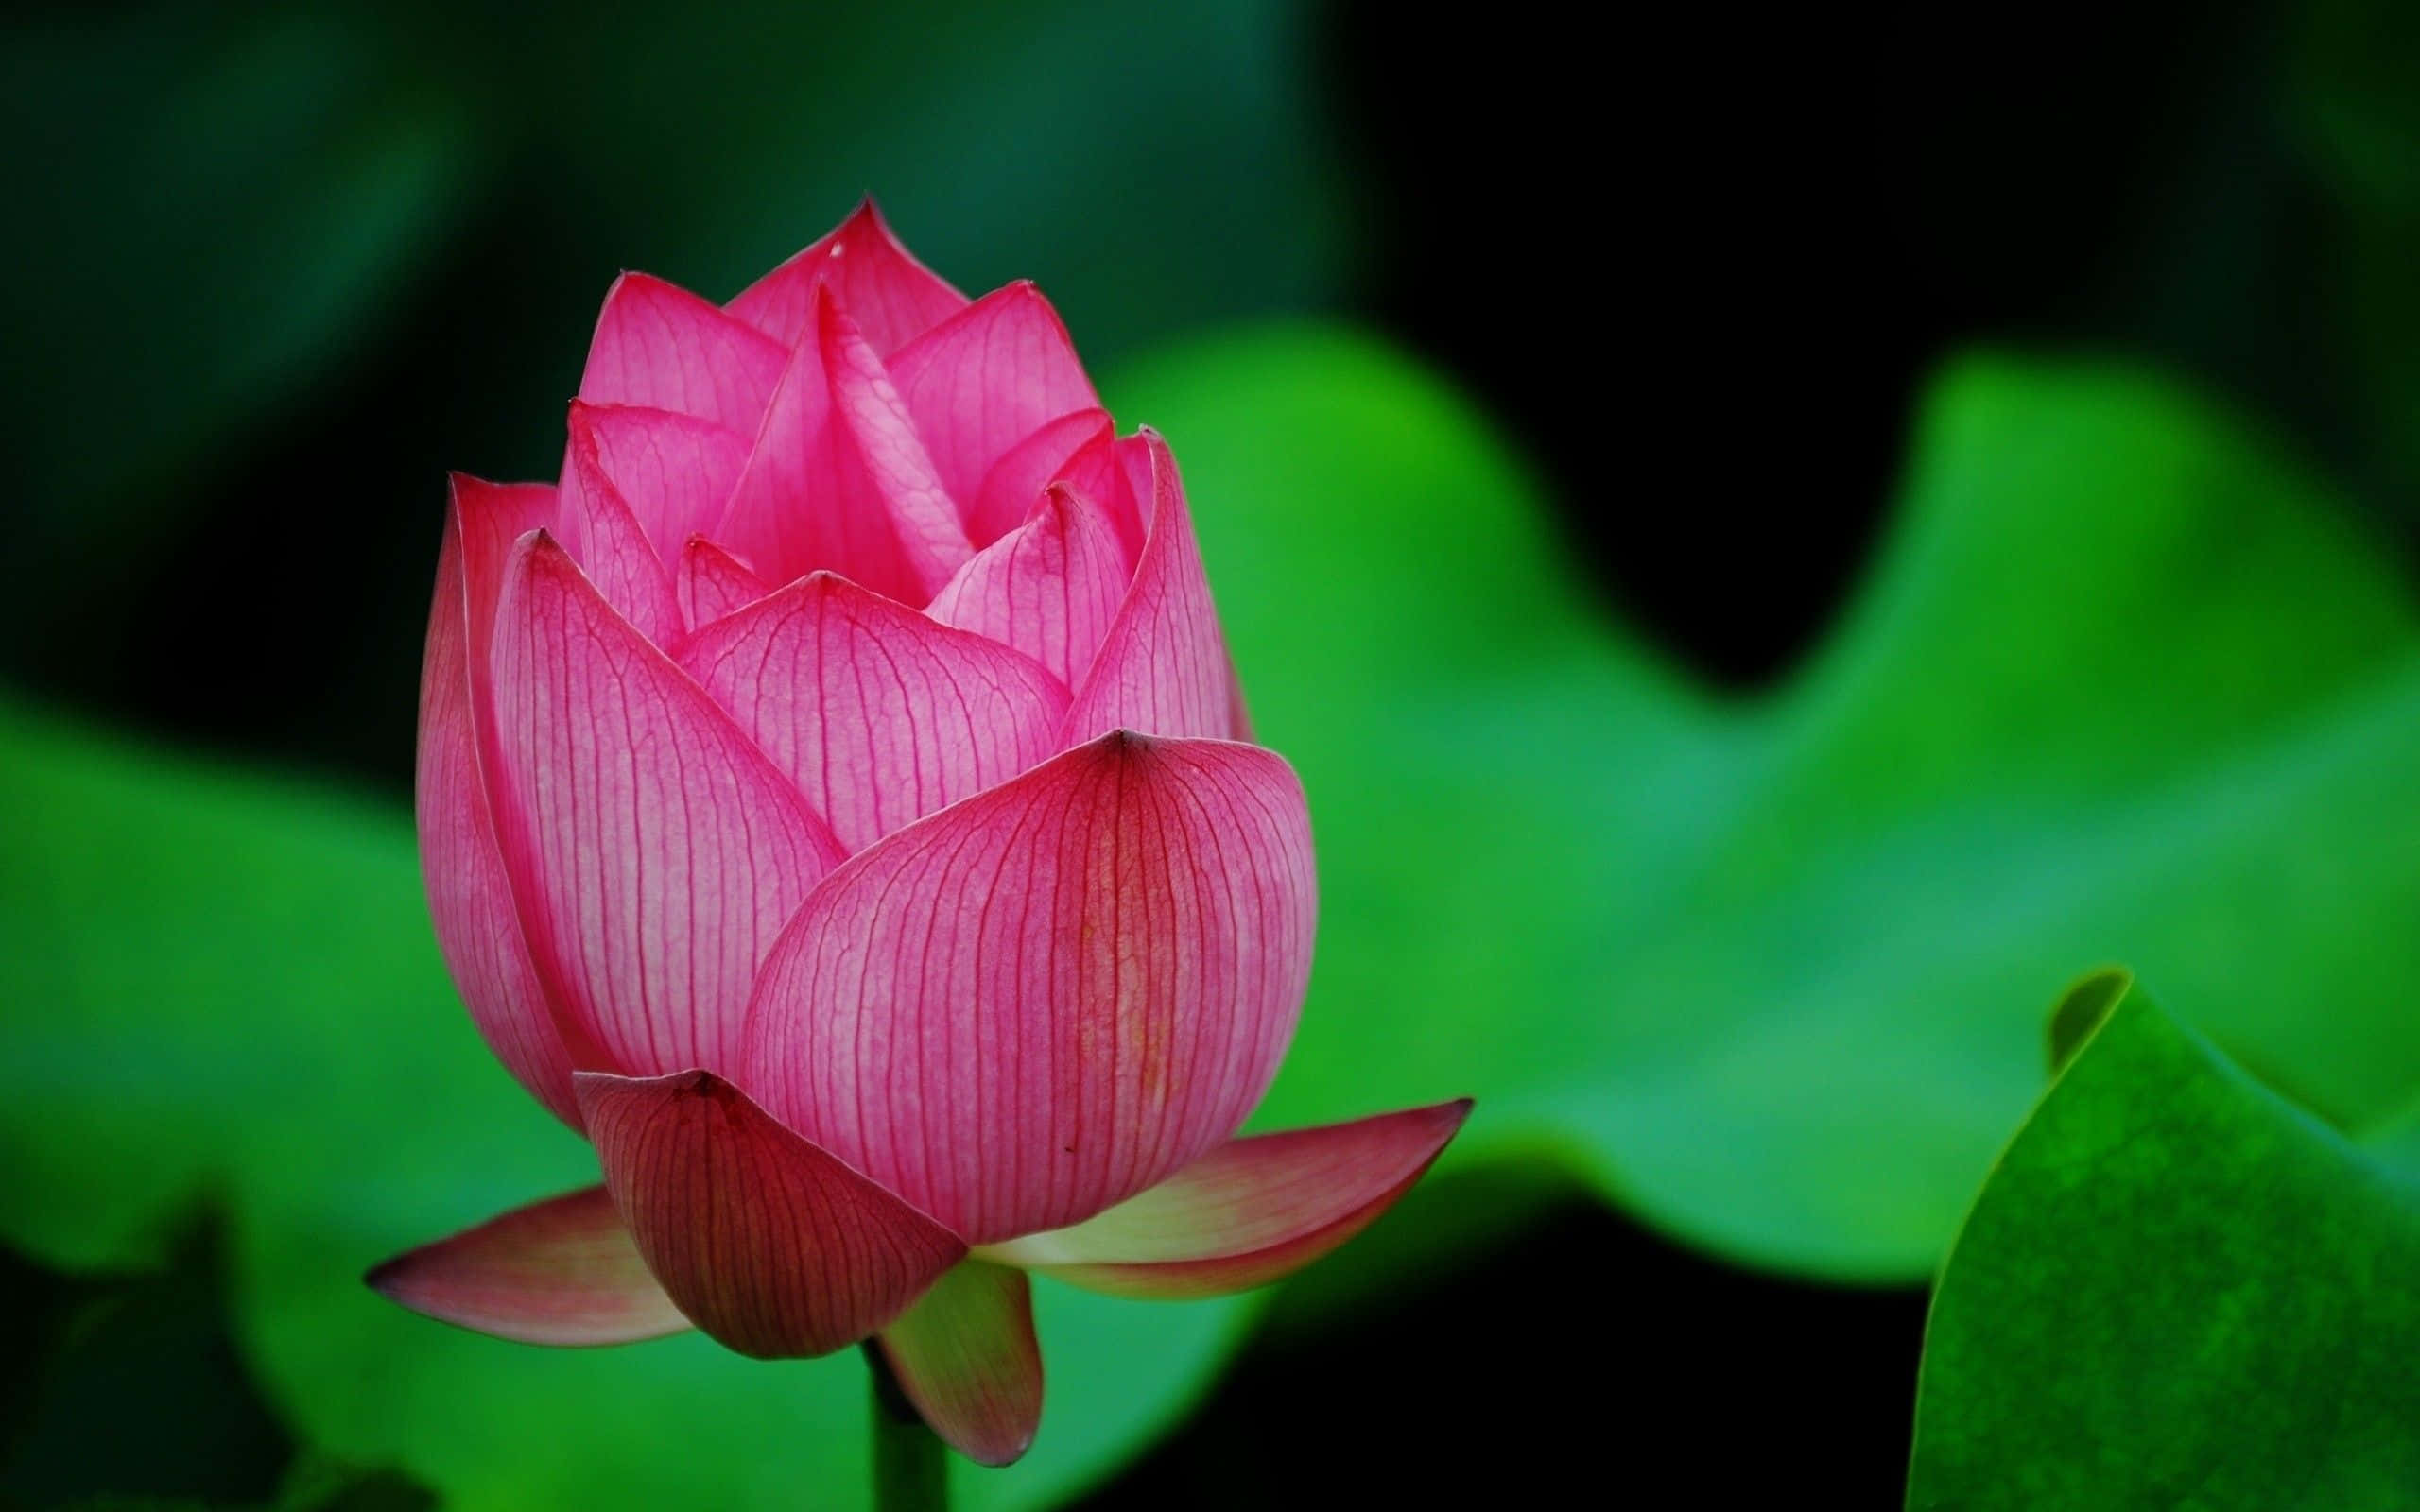 The beauty of a blooming lotus flower in all its glory"